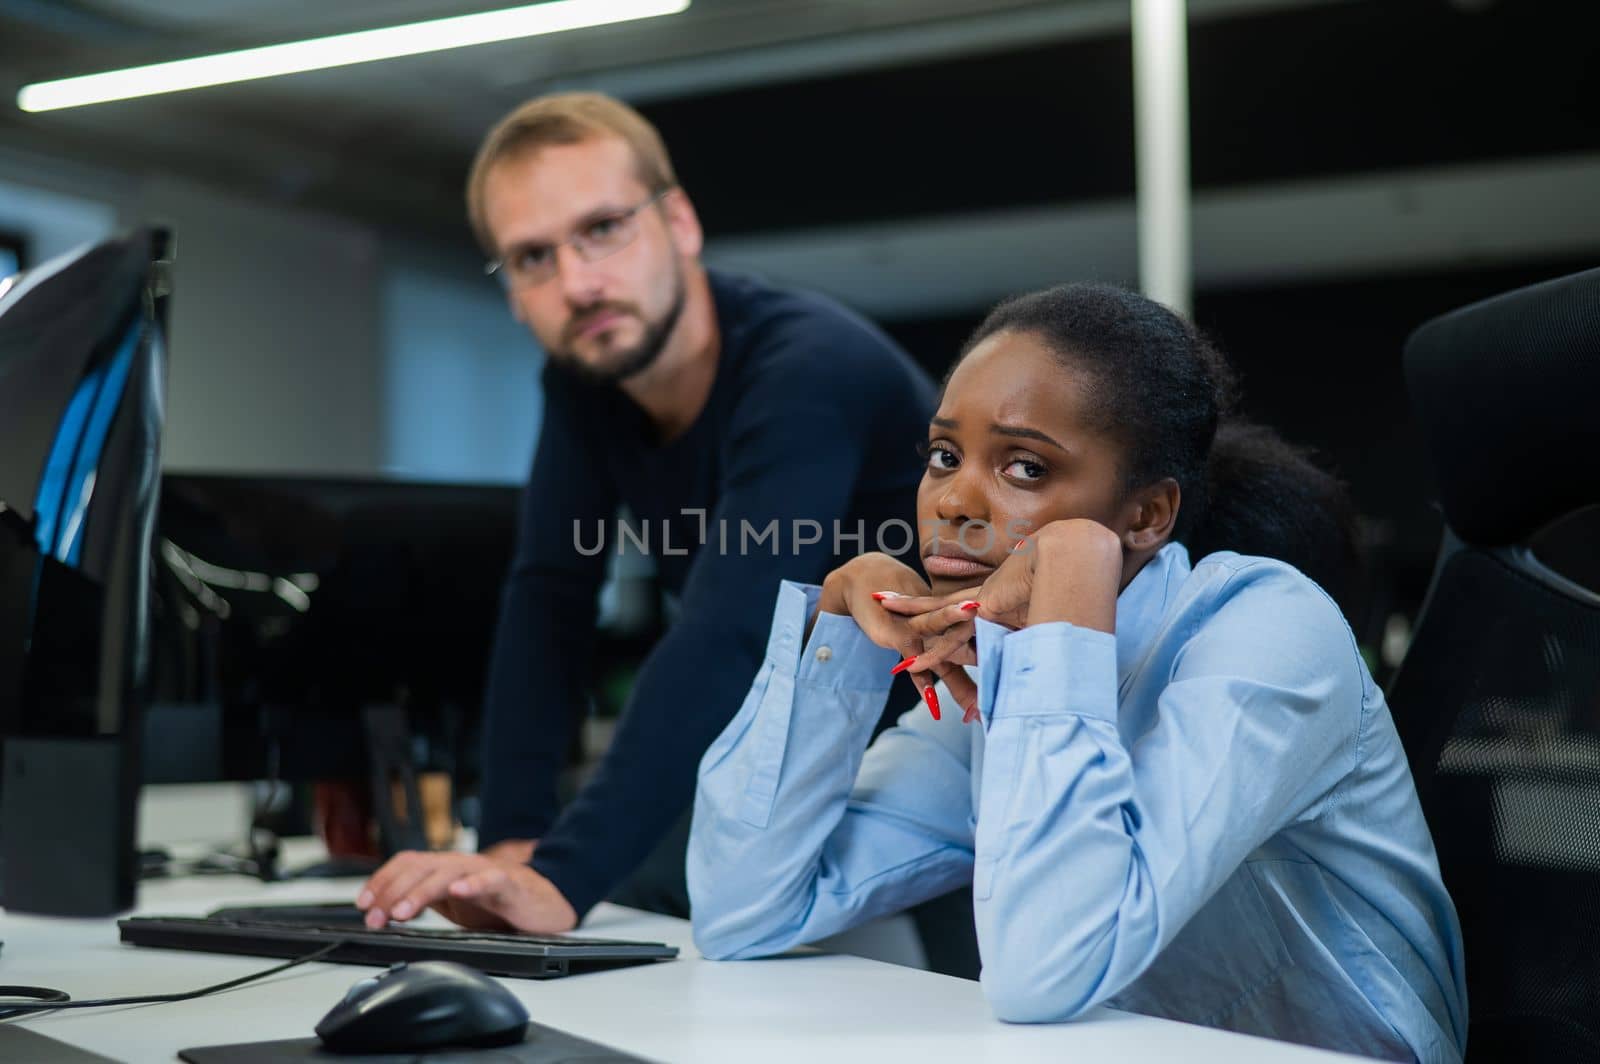 Colleagues look at the monitor and decide working moments. Caucasian man helps sad african woman solve computer problem. by mrwed54